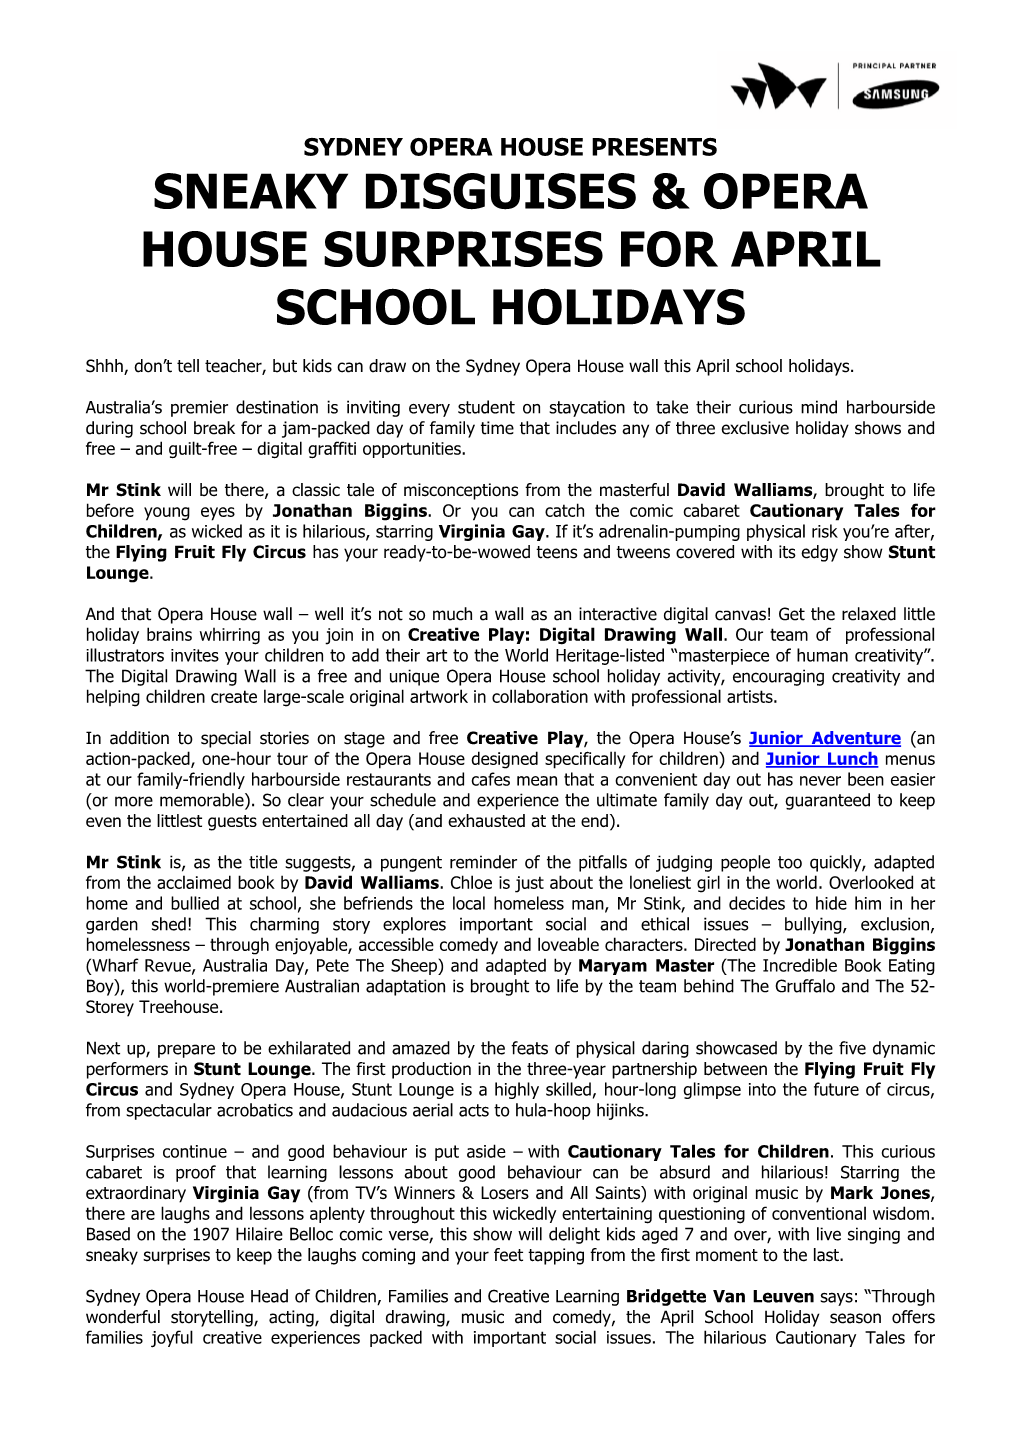 Sneaky Disguises & Opera House Surprises for April